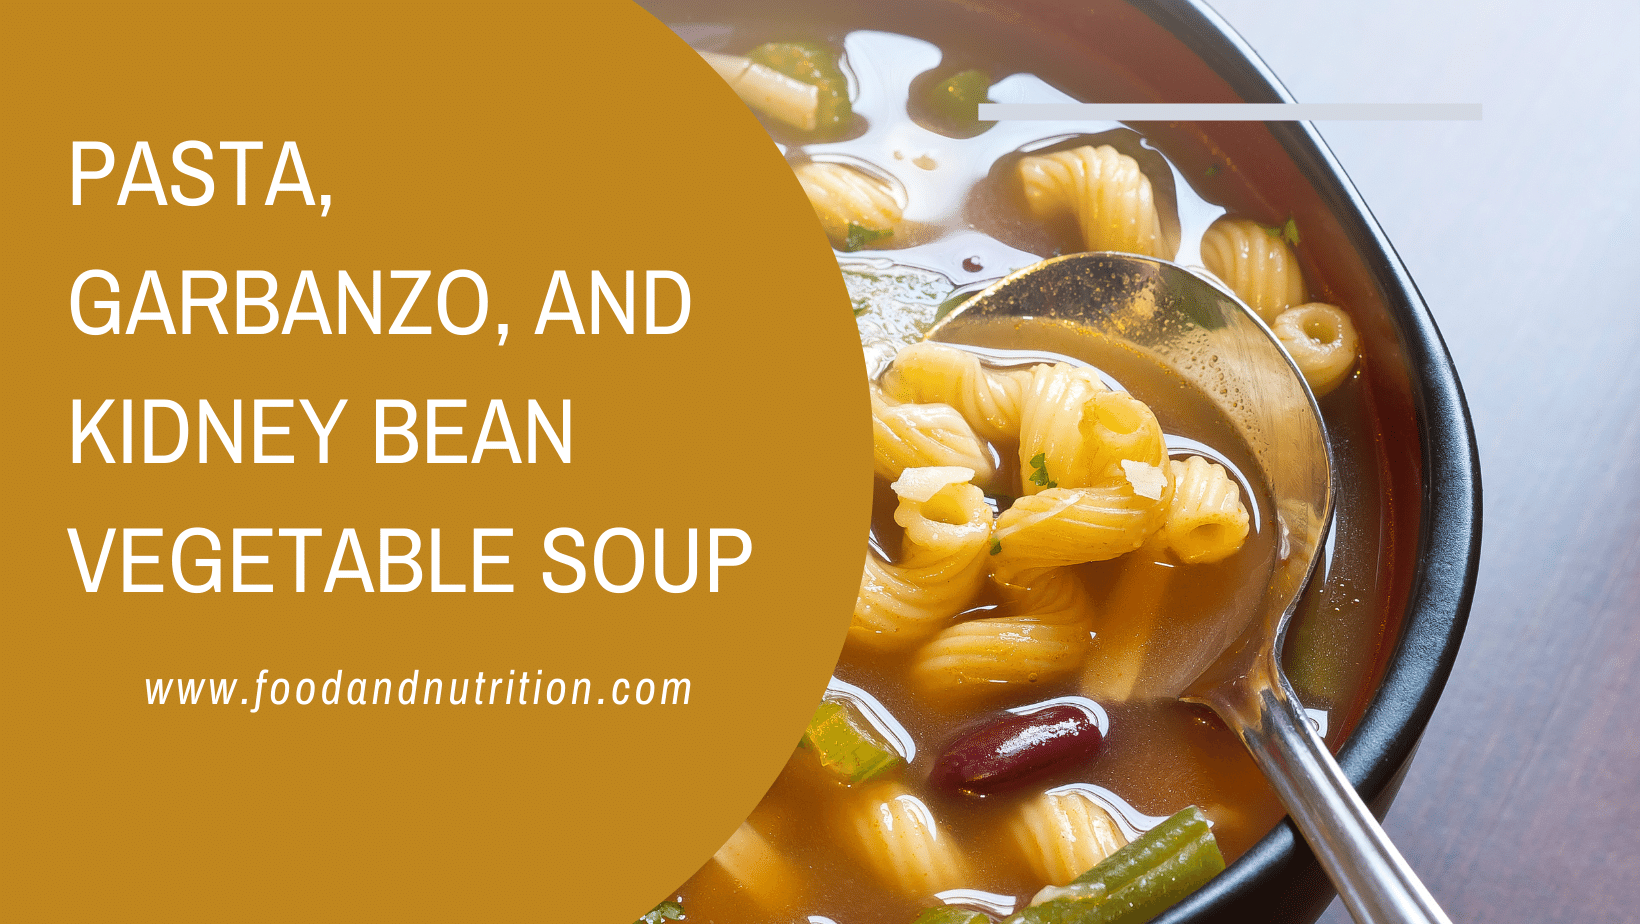 Discover the Perfect Bowl of Comfort: Pasta, Garbanzo, and Kidney Bean Vegetable Soup